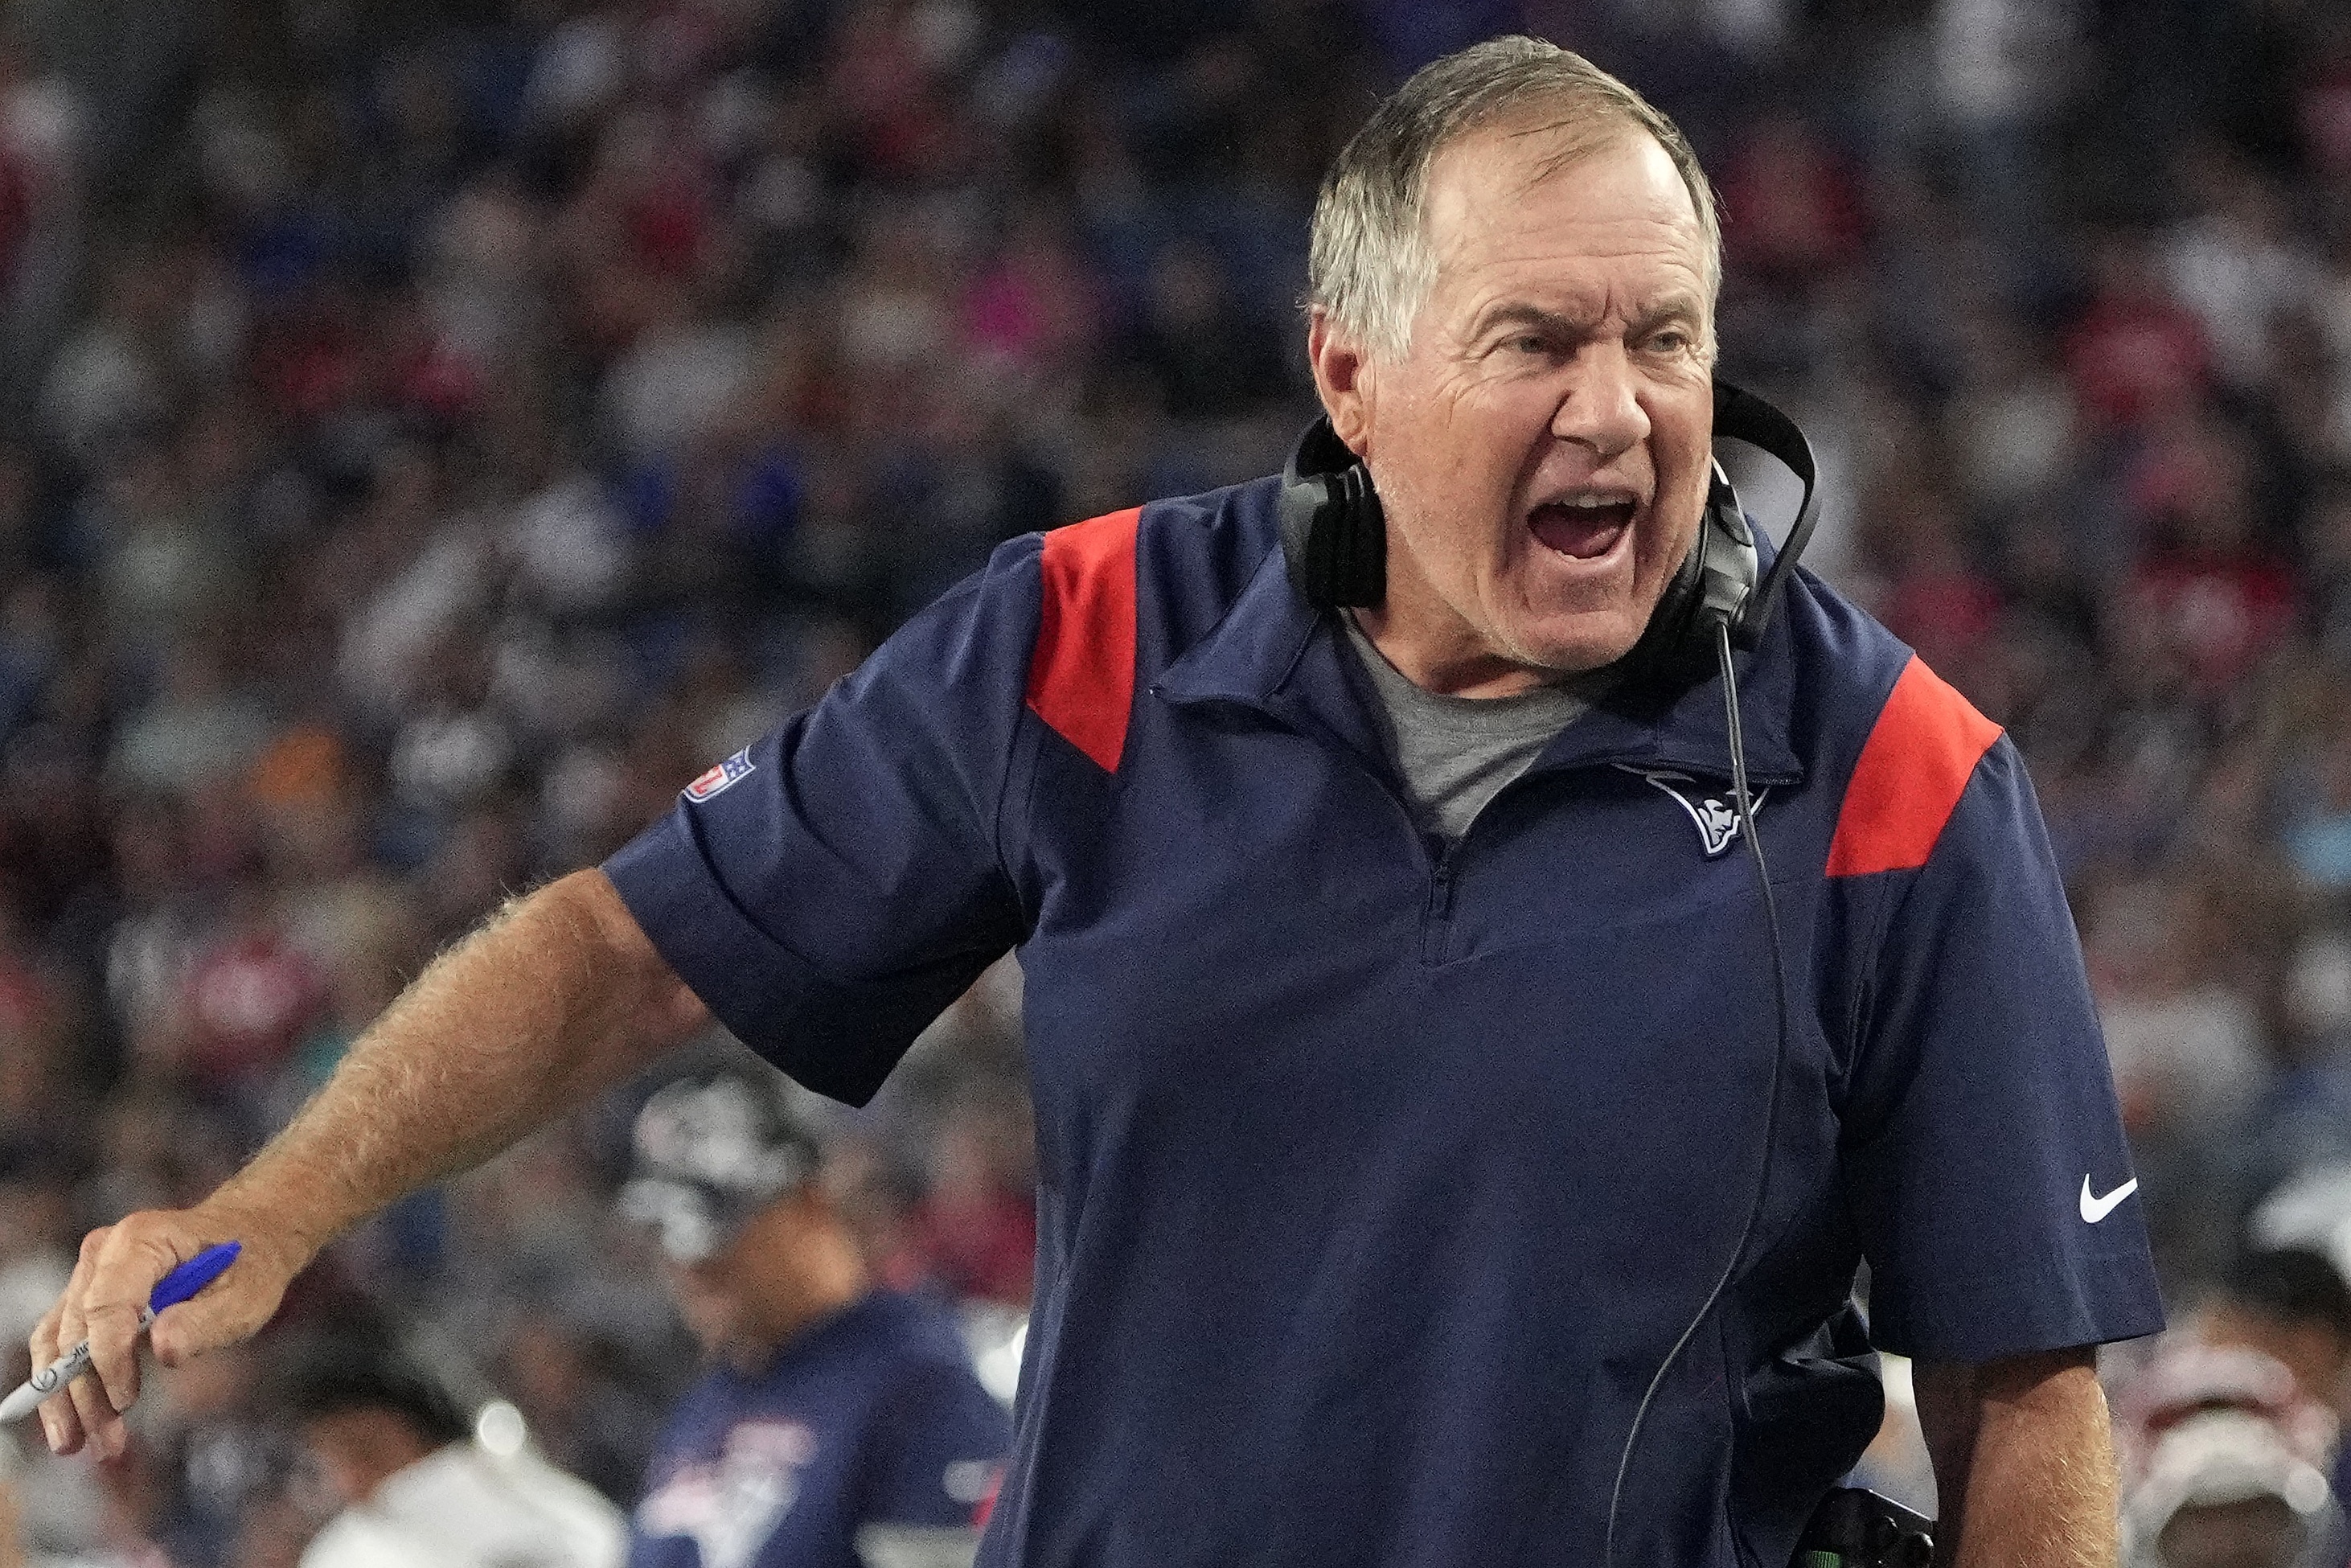 Pats head coach Bill Belichick has something cooking for Indianapolis. 